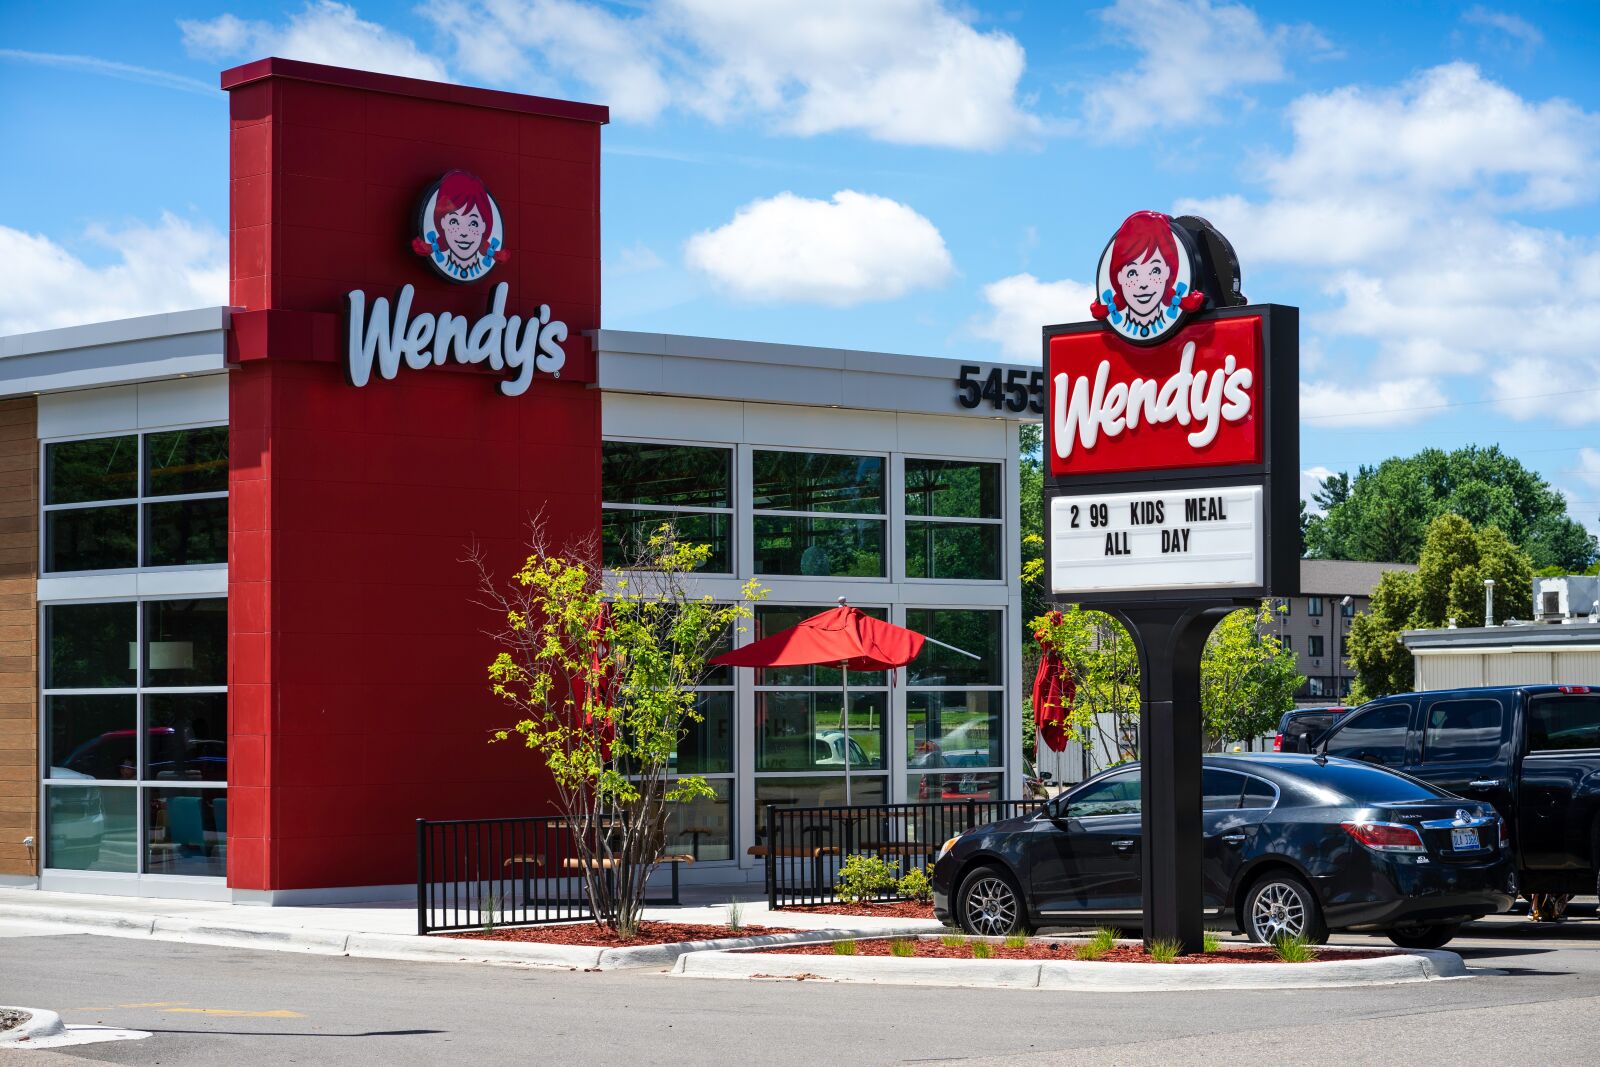 Sony a7 + Sony FE 85mm F1.8 sample photo. Wendy's, wendy, fast food photography